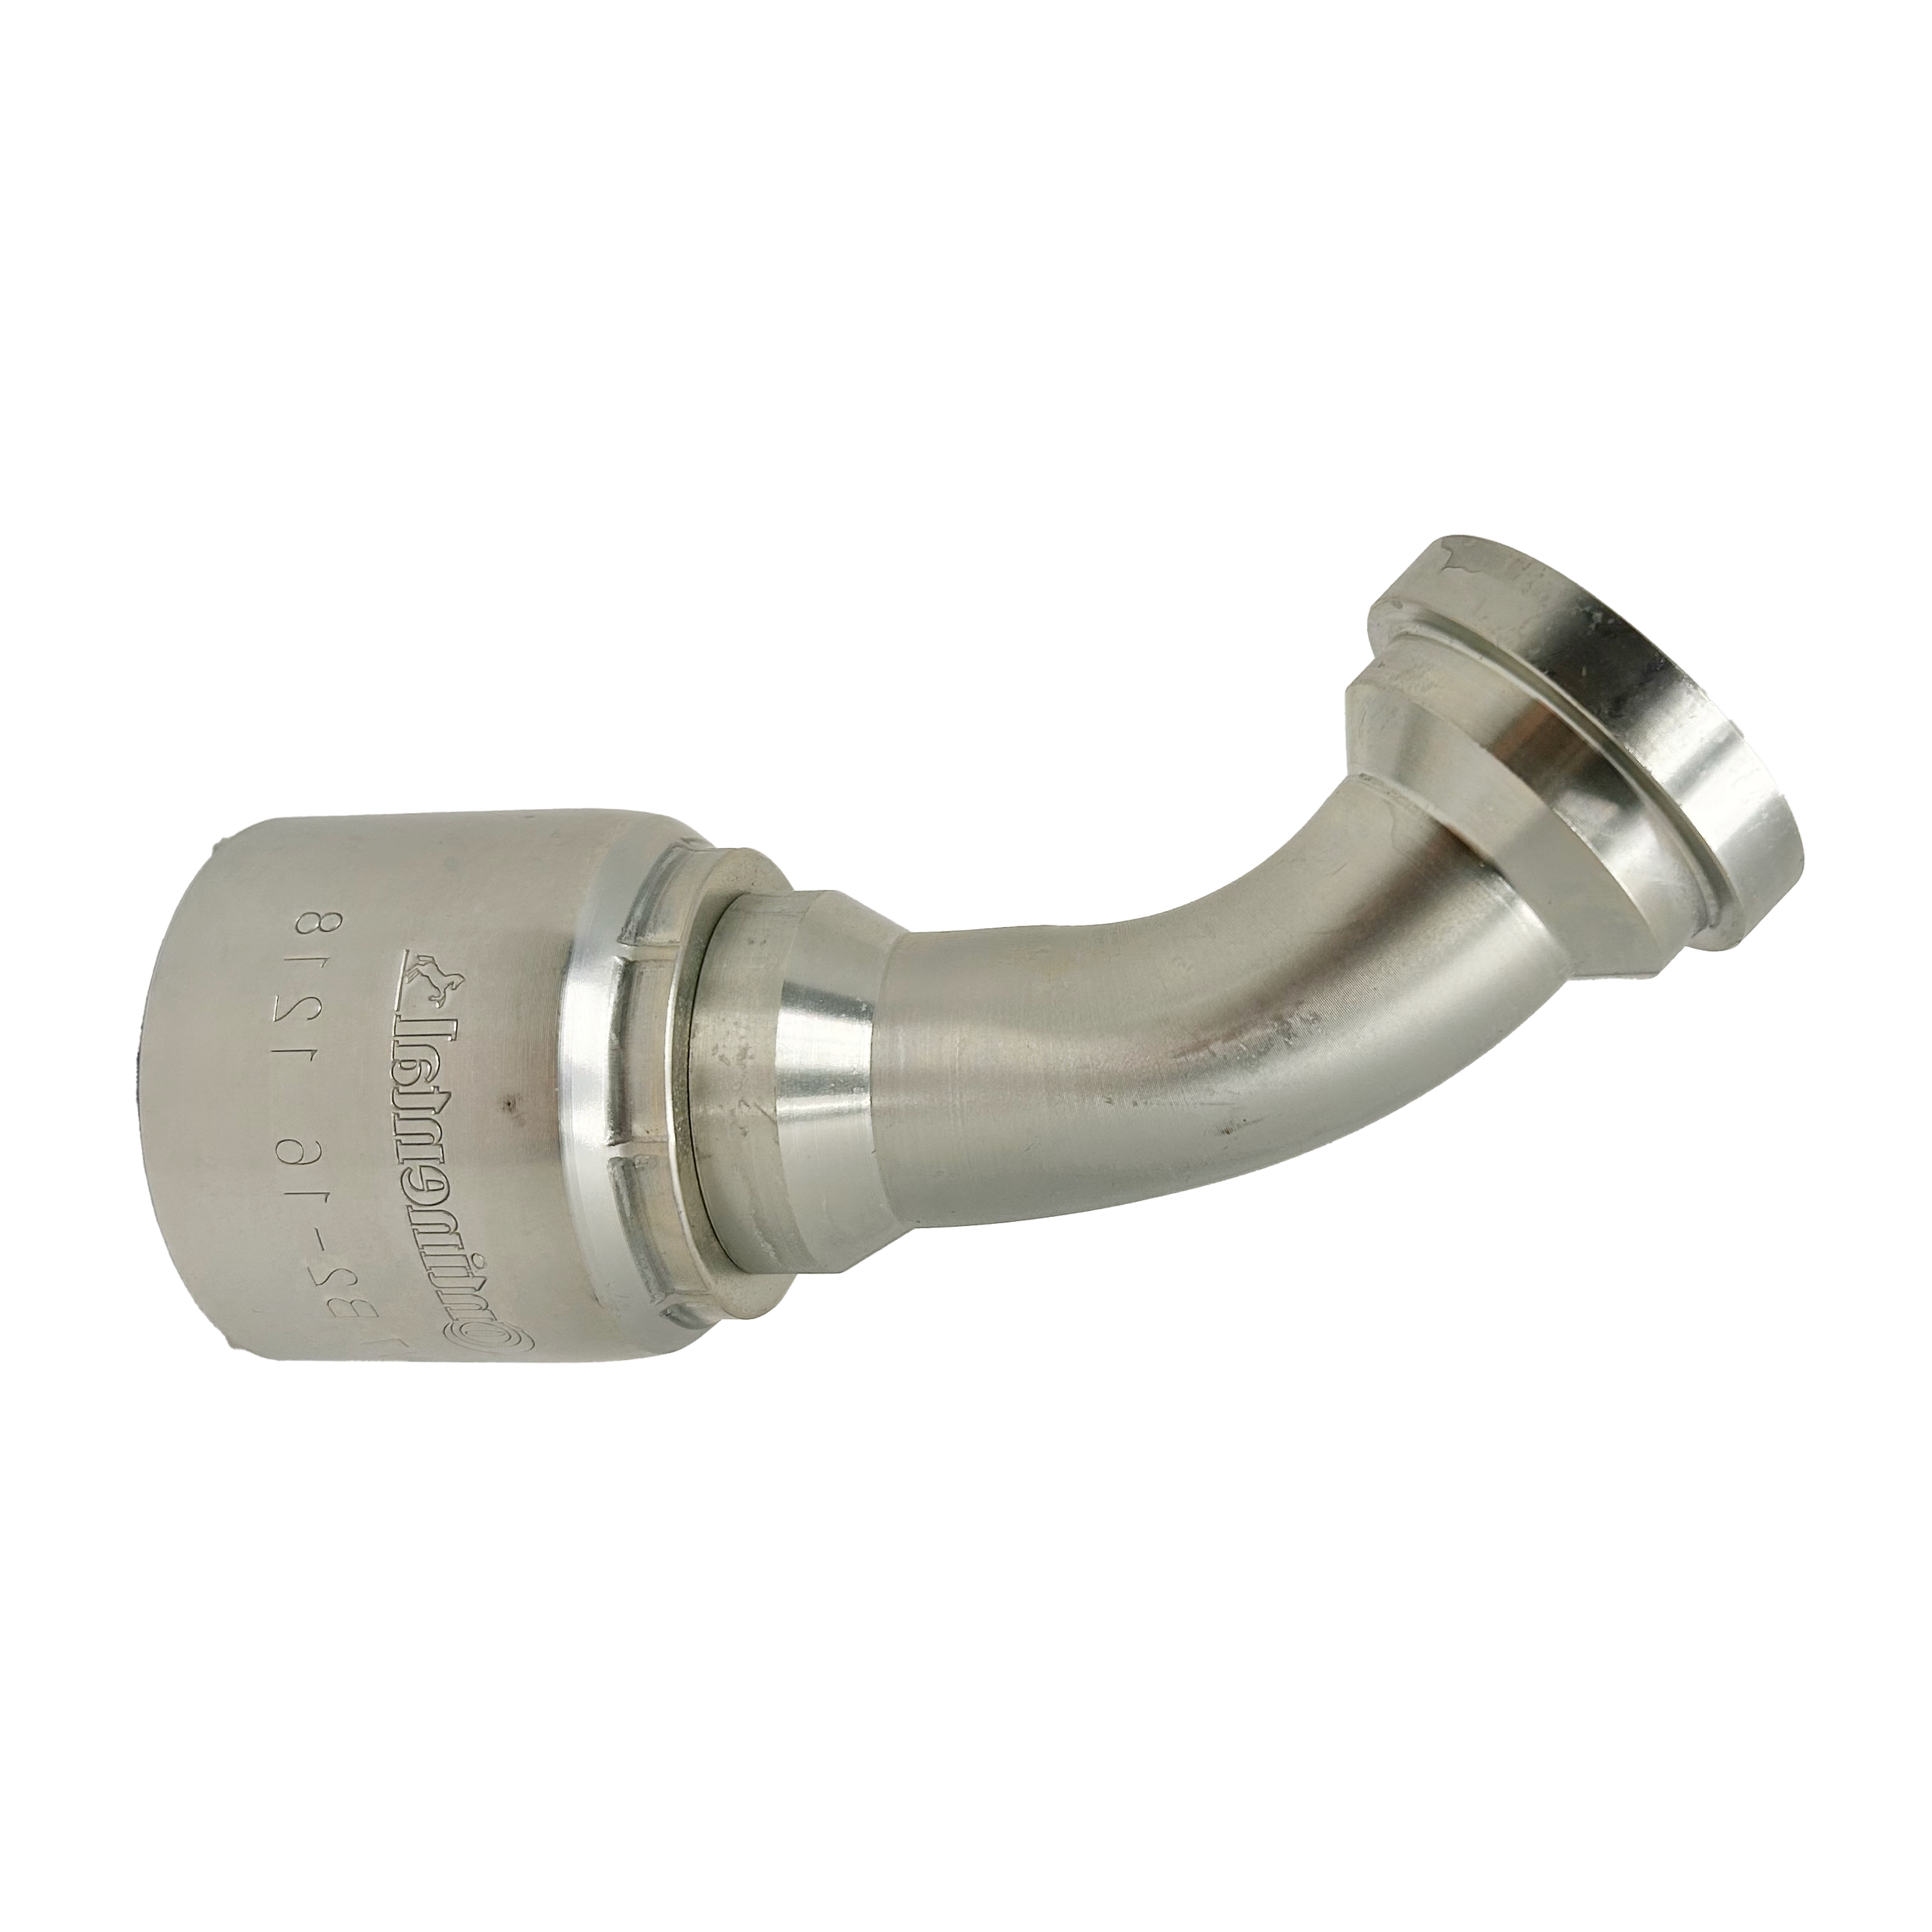 B2-FL45-2424S: Continental Hose Fitting, 1.5 (1-1/2") Hose ID x 1.5 (1-1/2") Code 61, 45-Degree Connection